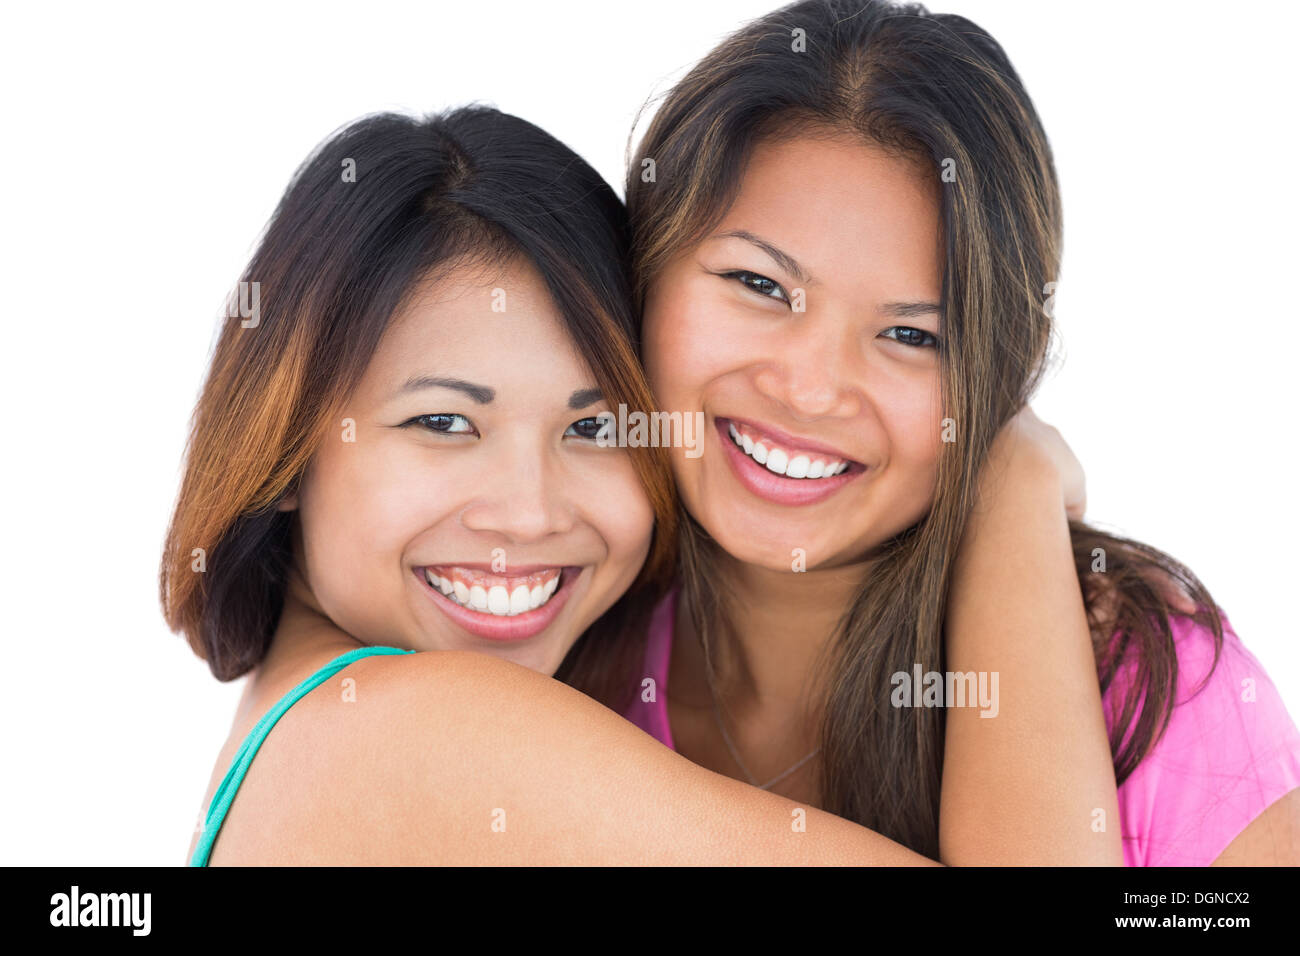 Two pretty sisters embracing each other Stock Photo